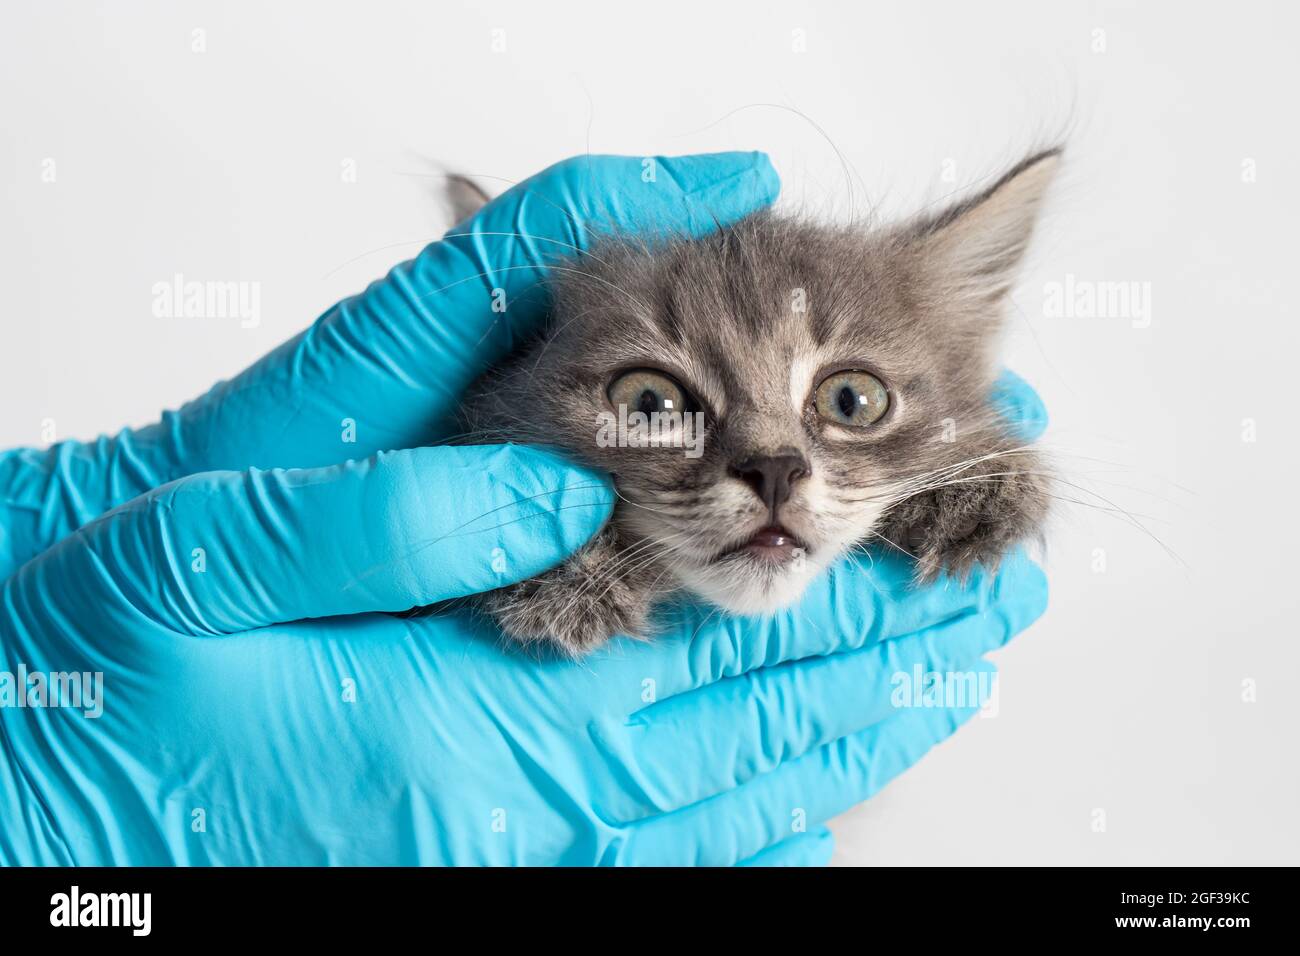 Examination of the eyes and nose of the kitten. Veterinary clinic, prevention and treatment of diseases in cats Stock Photo